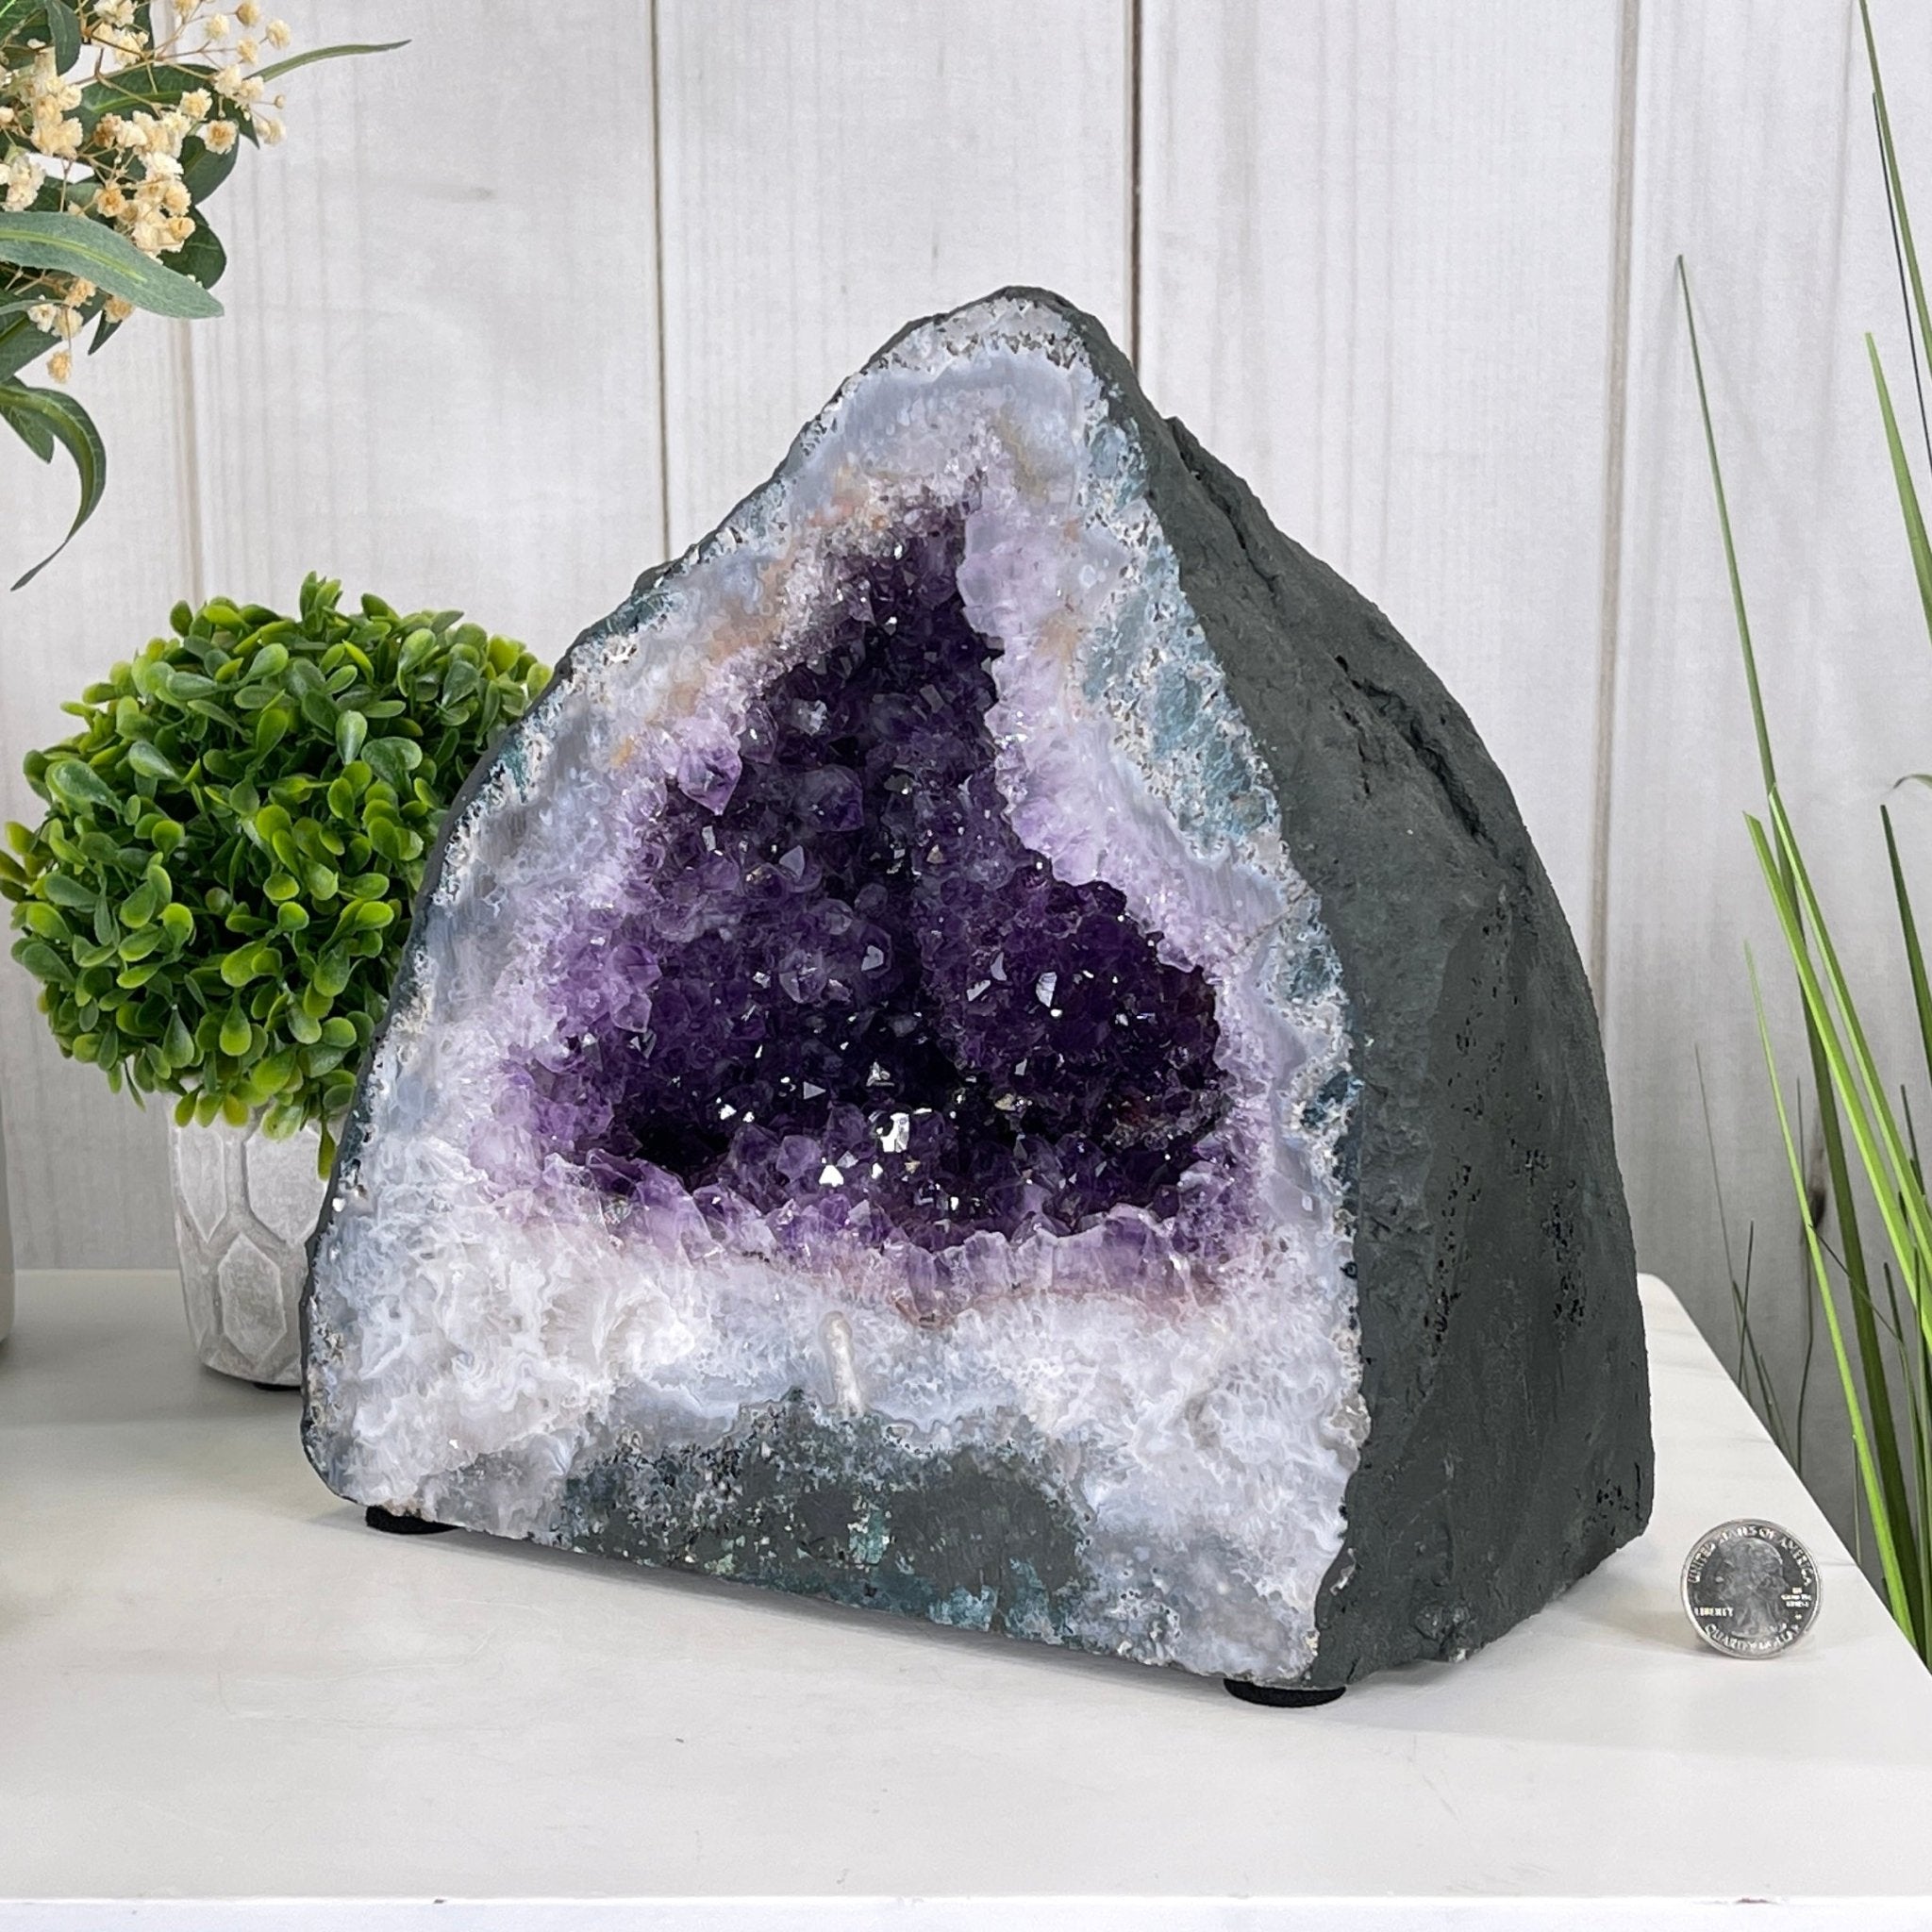 Extra Quality Brazilian Amethyst Cathedral, 9.1” tall & 19.7 lbs #5601-0581 by Brazil Gems - Brazil GemsBrazil GemsExtra Quality Brazilian Amethyst Cathedral, 9.1” tall & 19.7 lbs #5601-0581 by Brazil GemsCathedrals5601-0581